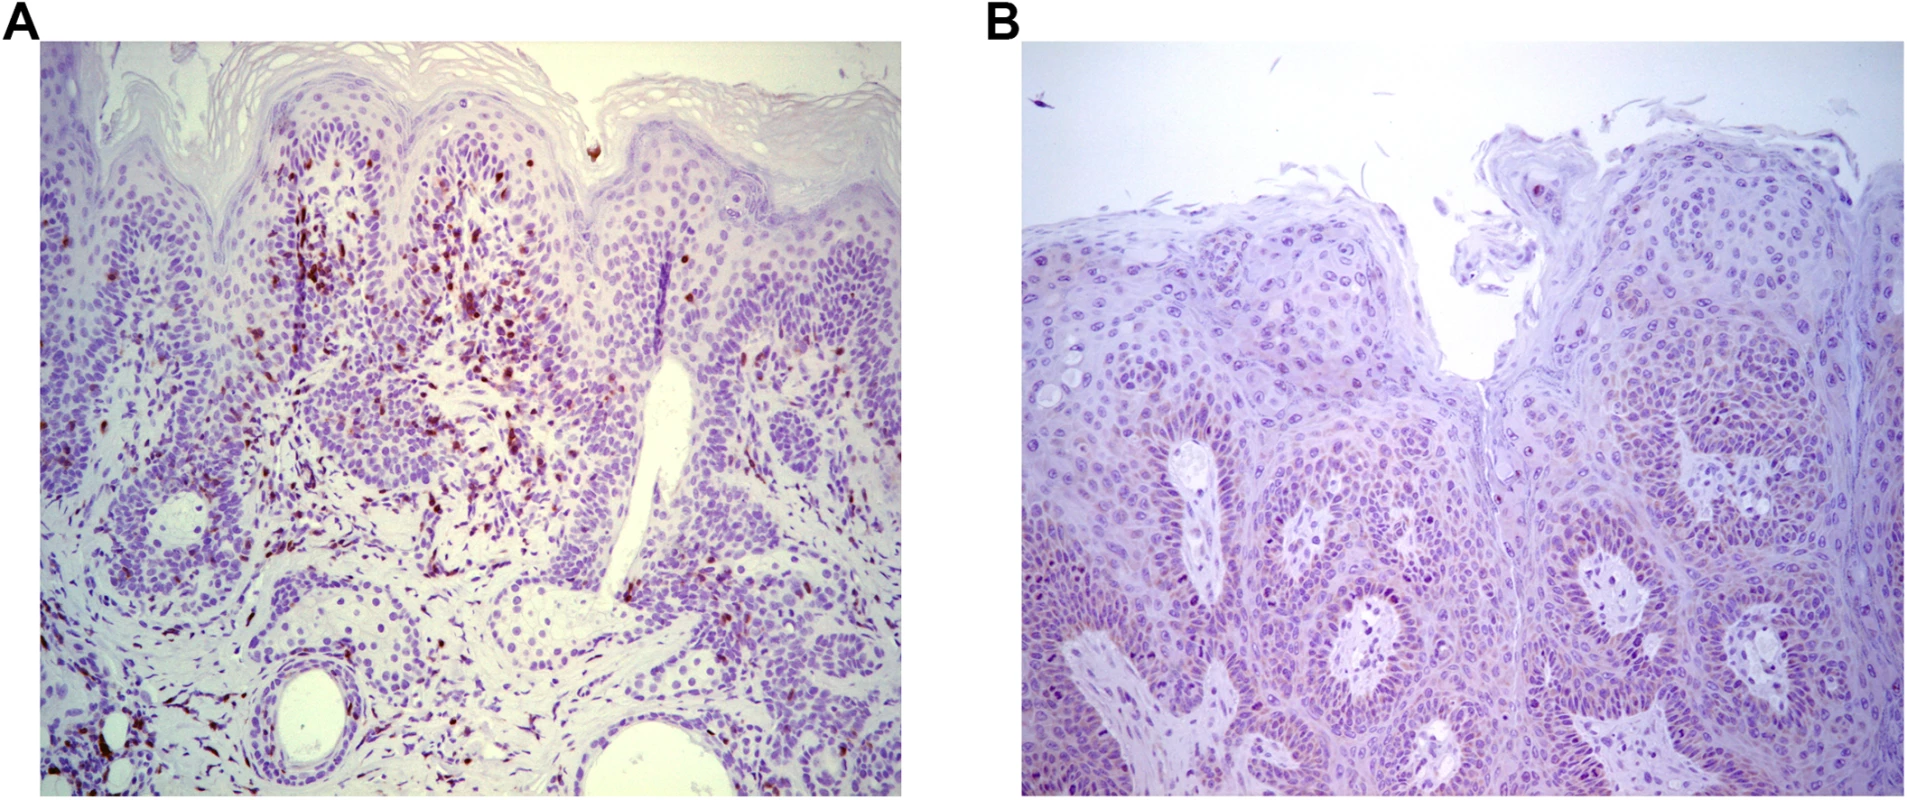 Infiltration of T cells into papilloma site associated with MusPV1 papilloma regression.